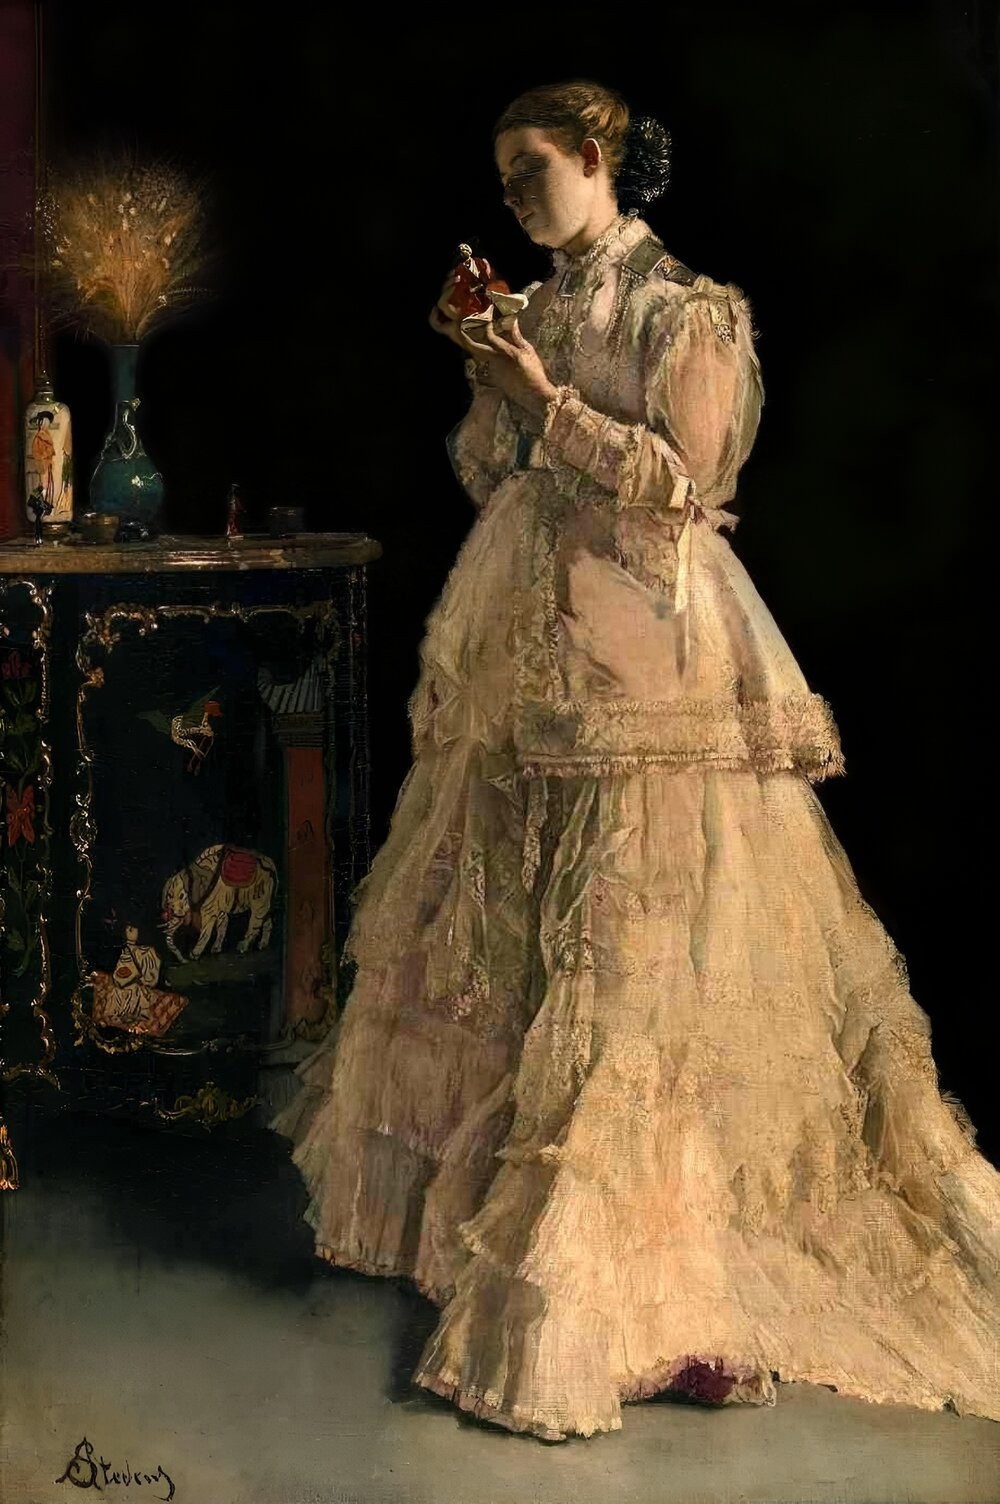 The Lady in Pink by Alfred Stevens, 1867